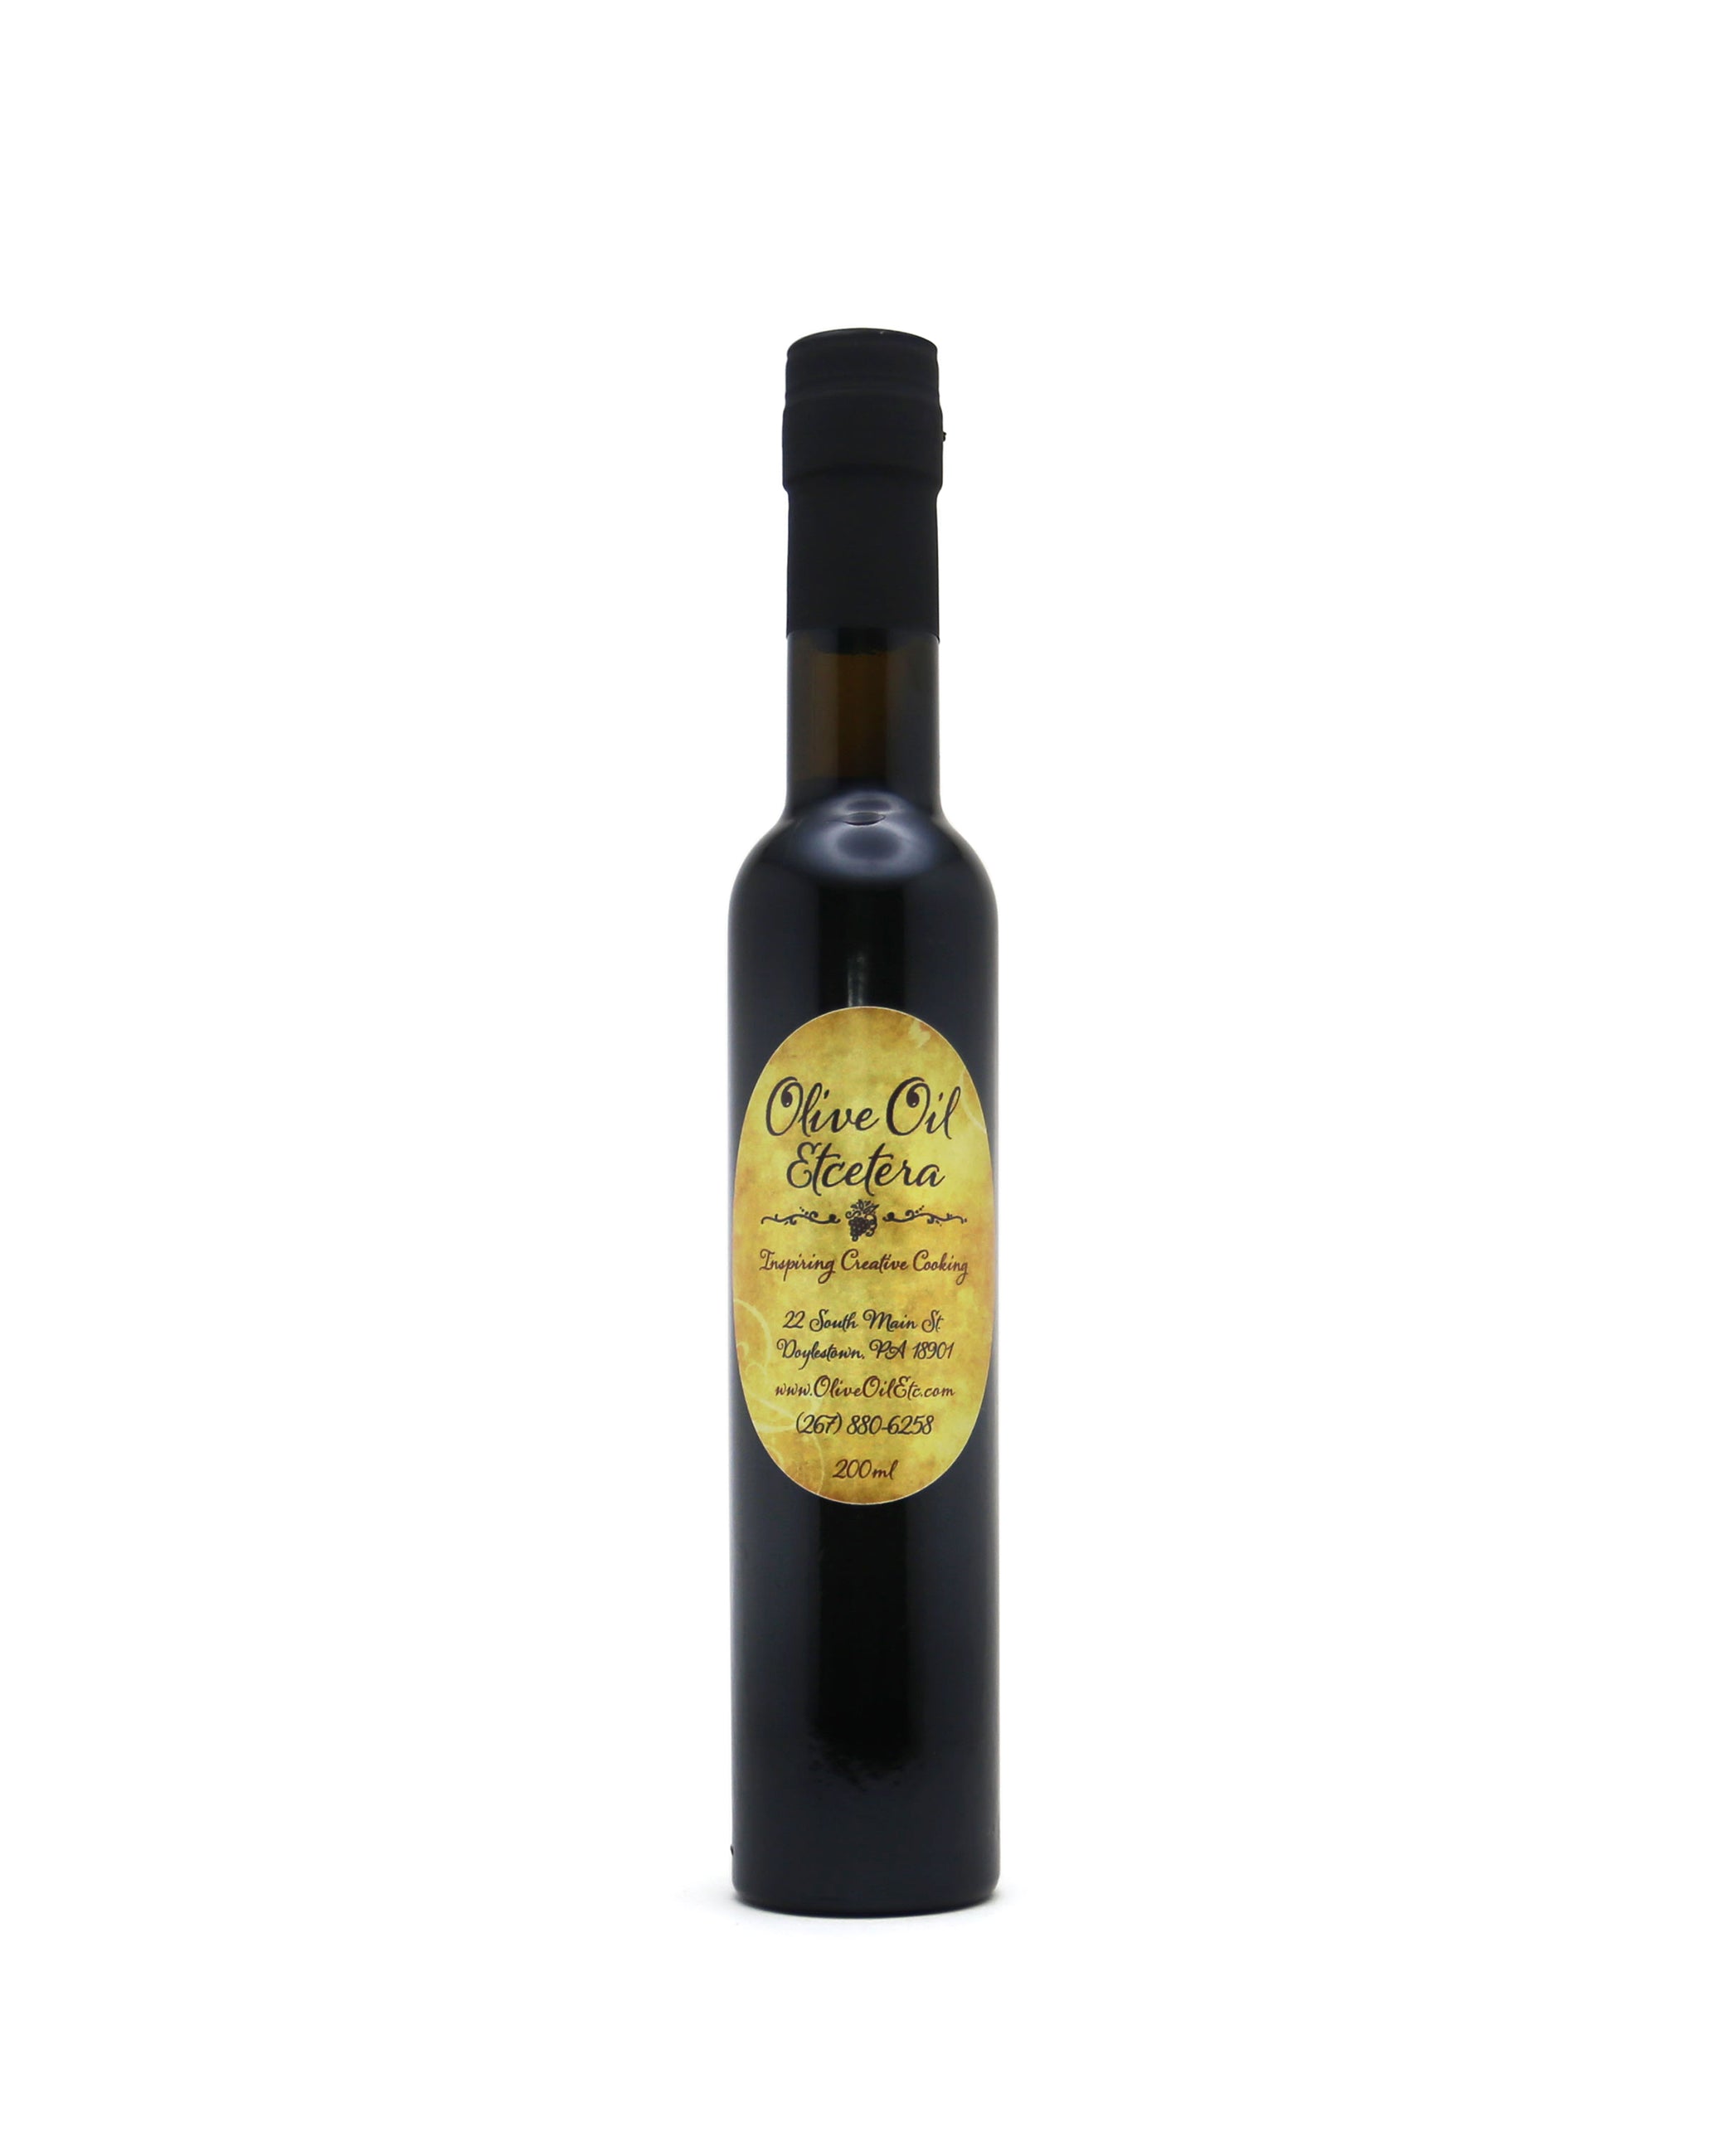 Tuscan Herb Olive Oil - Olive Oil Etcetera - Bucks County'sGourmet Olive Oil and Vinegar Store